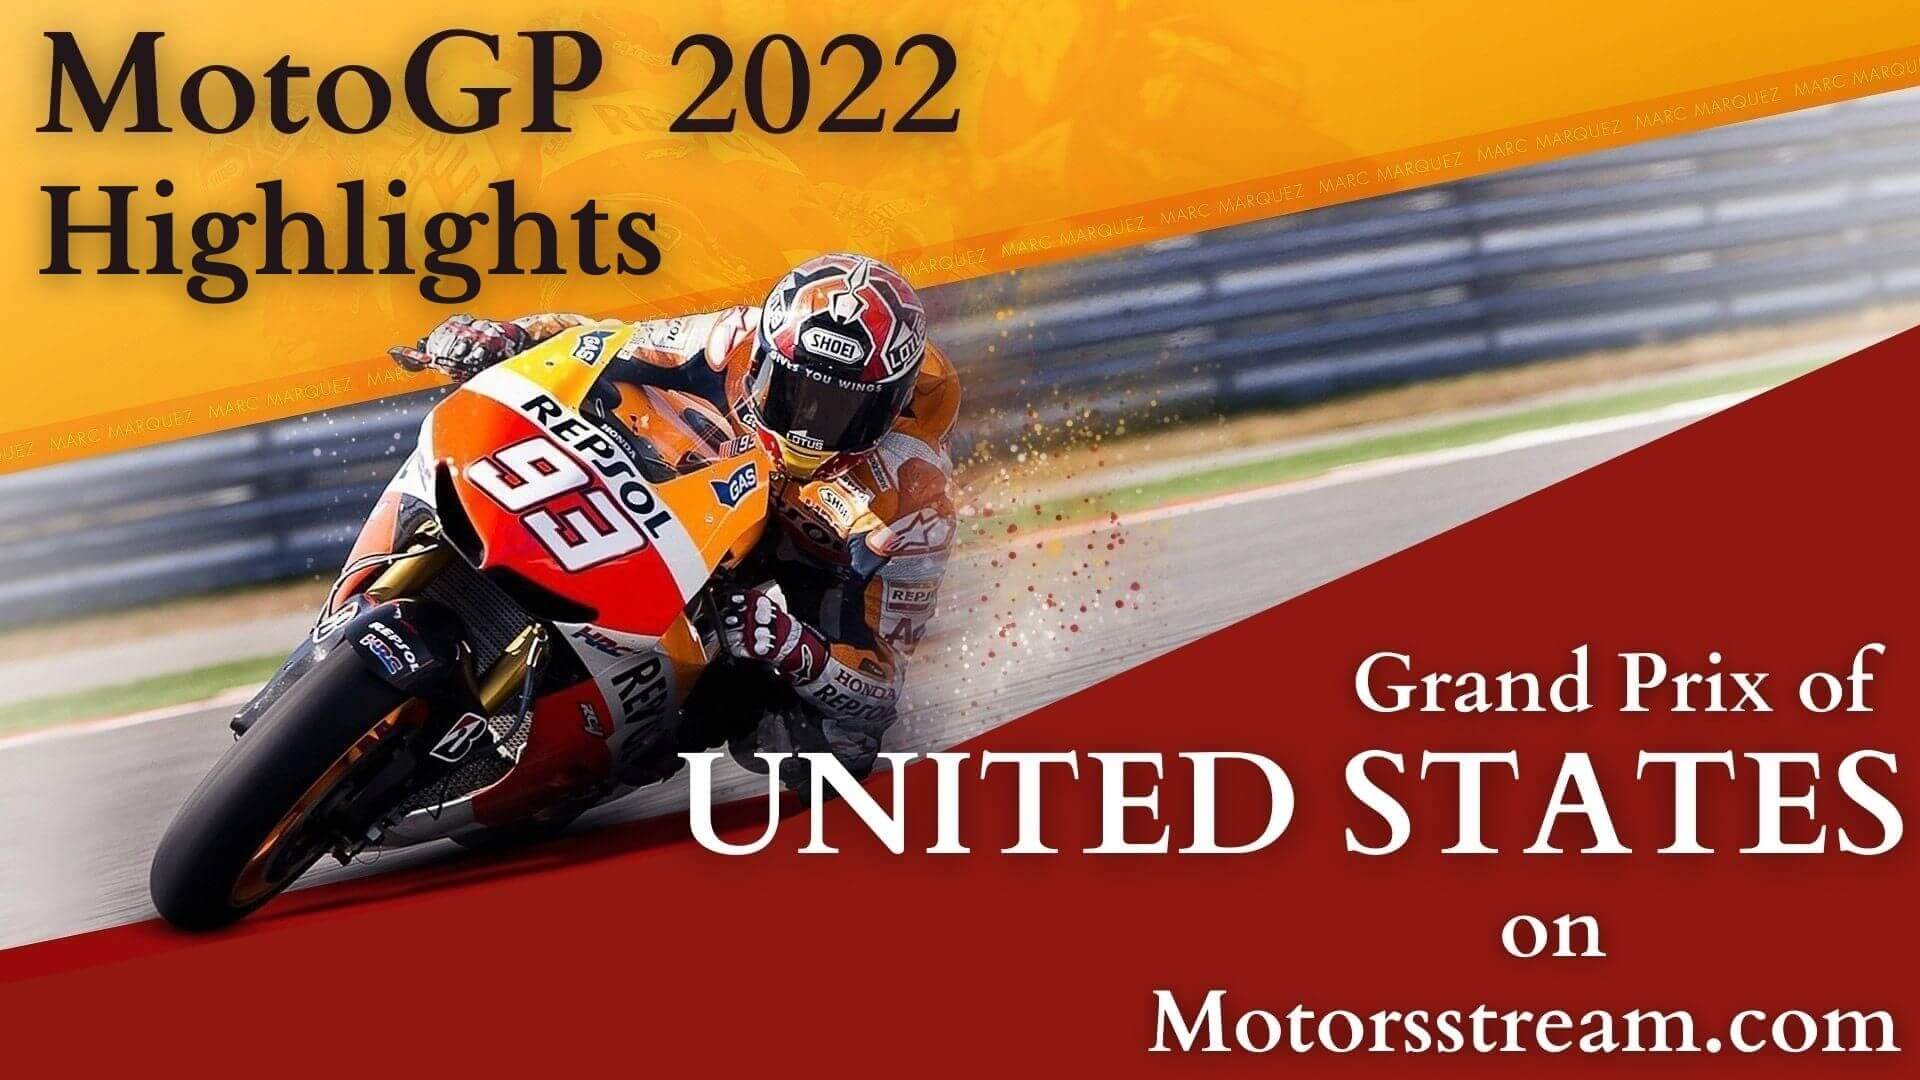 The Americas Motorcycle Grand Prix Highlights 2022